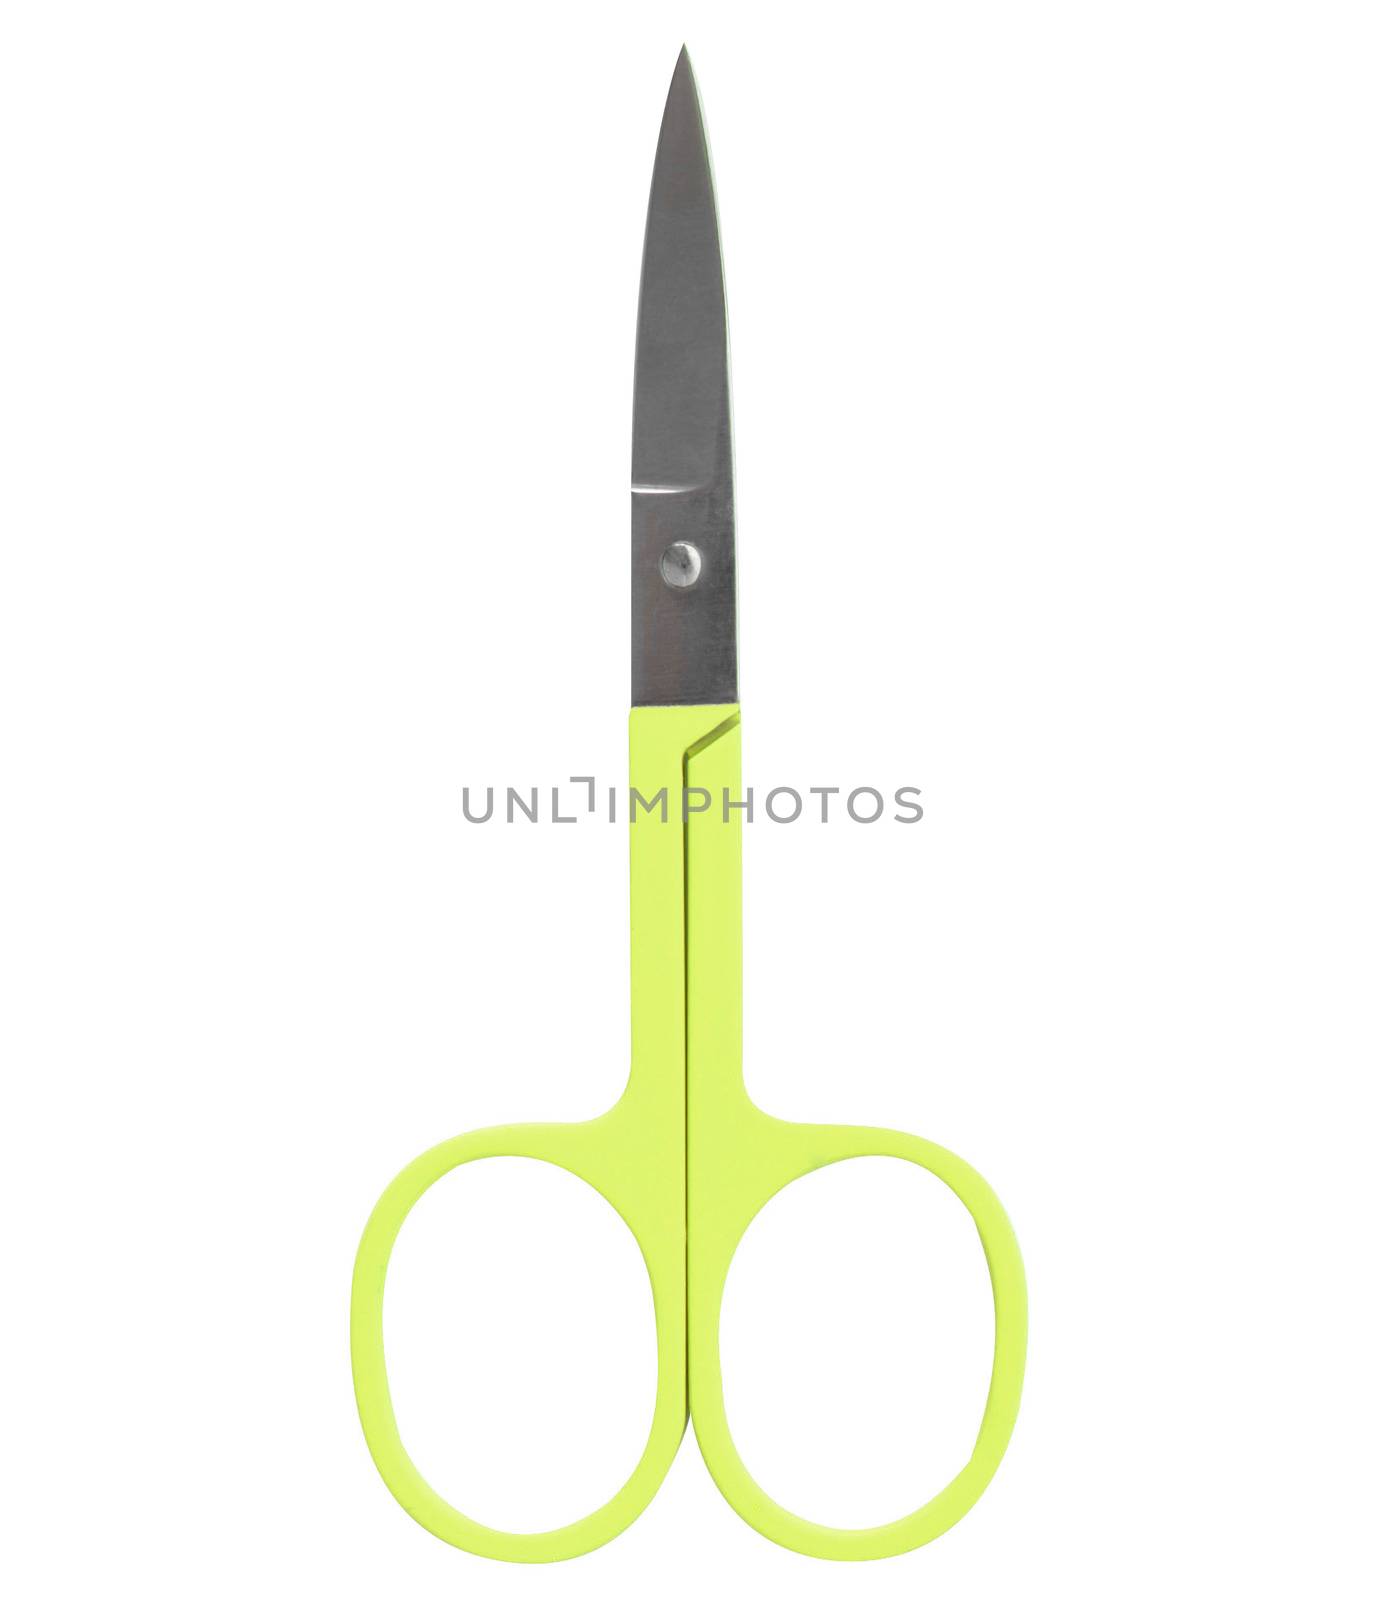 manicure scissors with yellow plastic handles  by ozaiachin